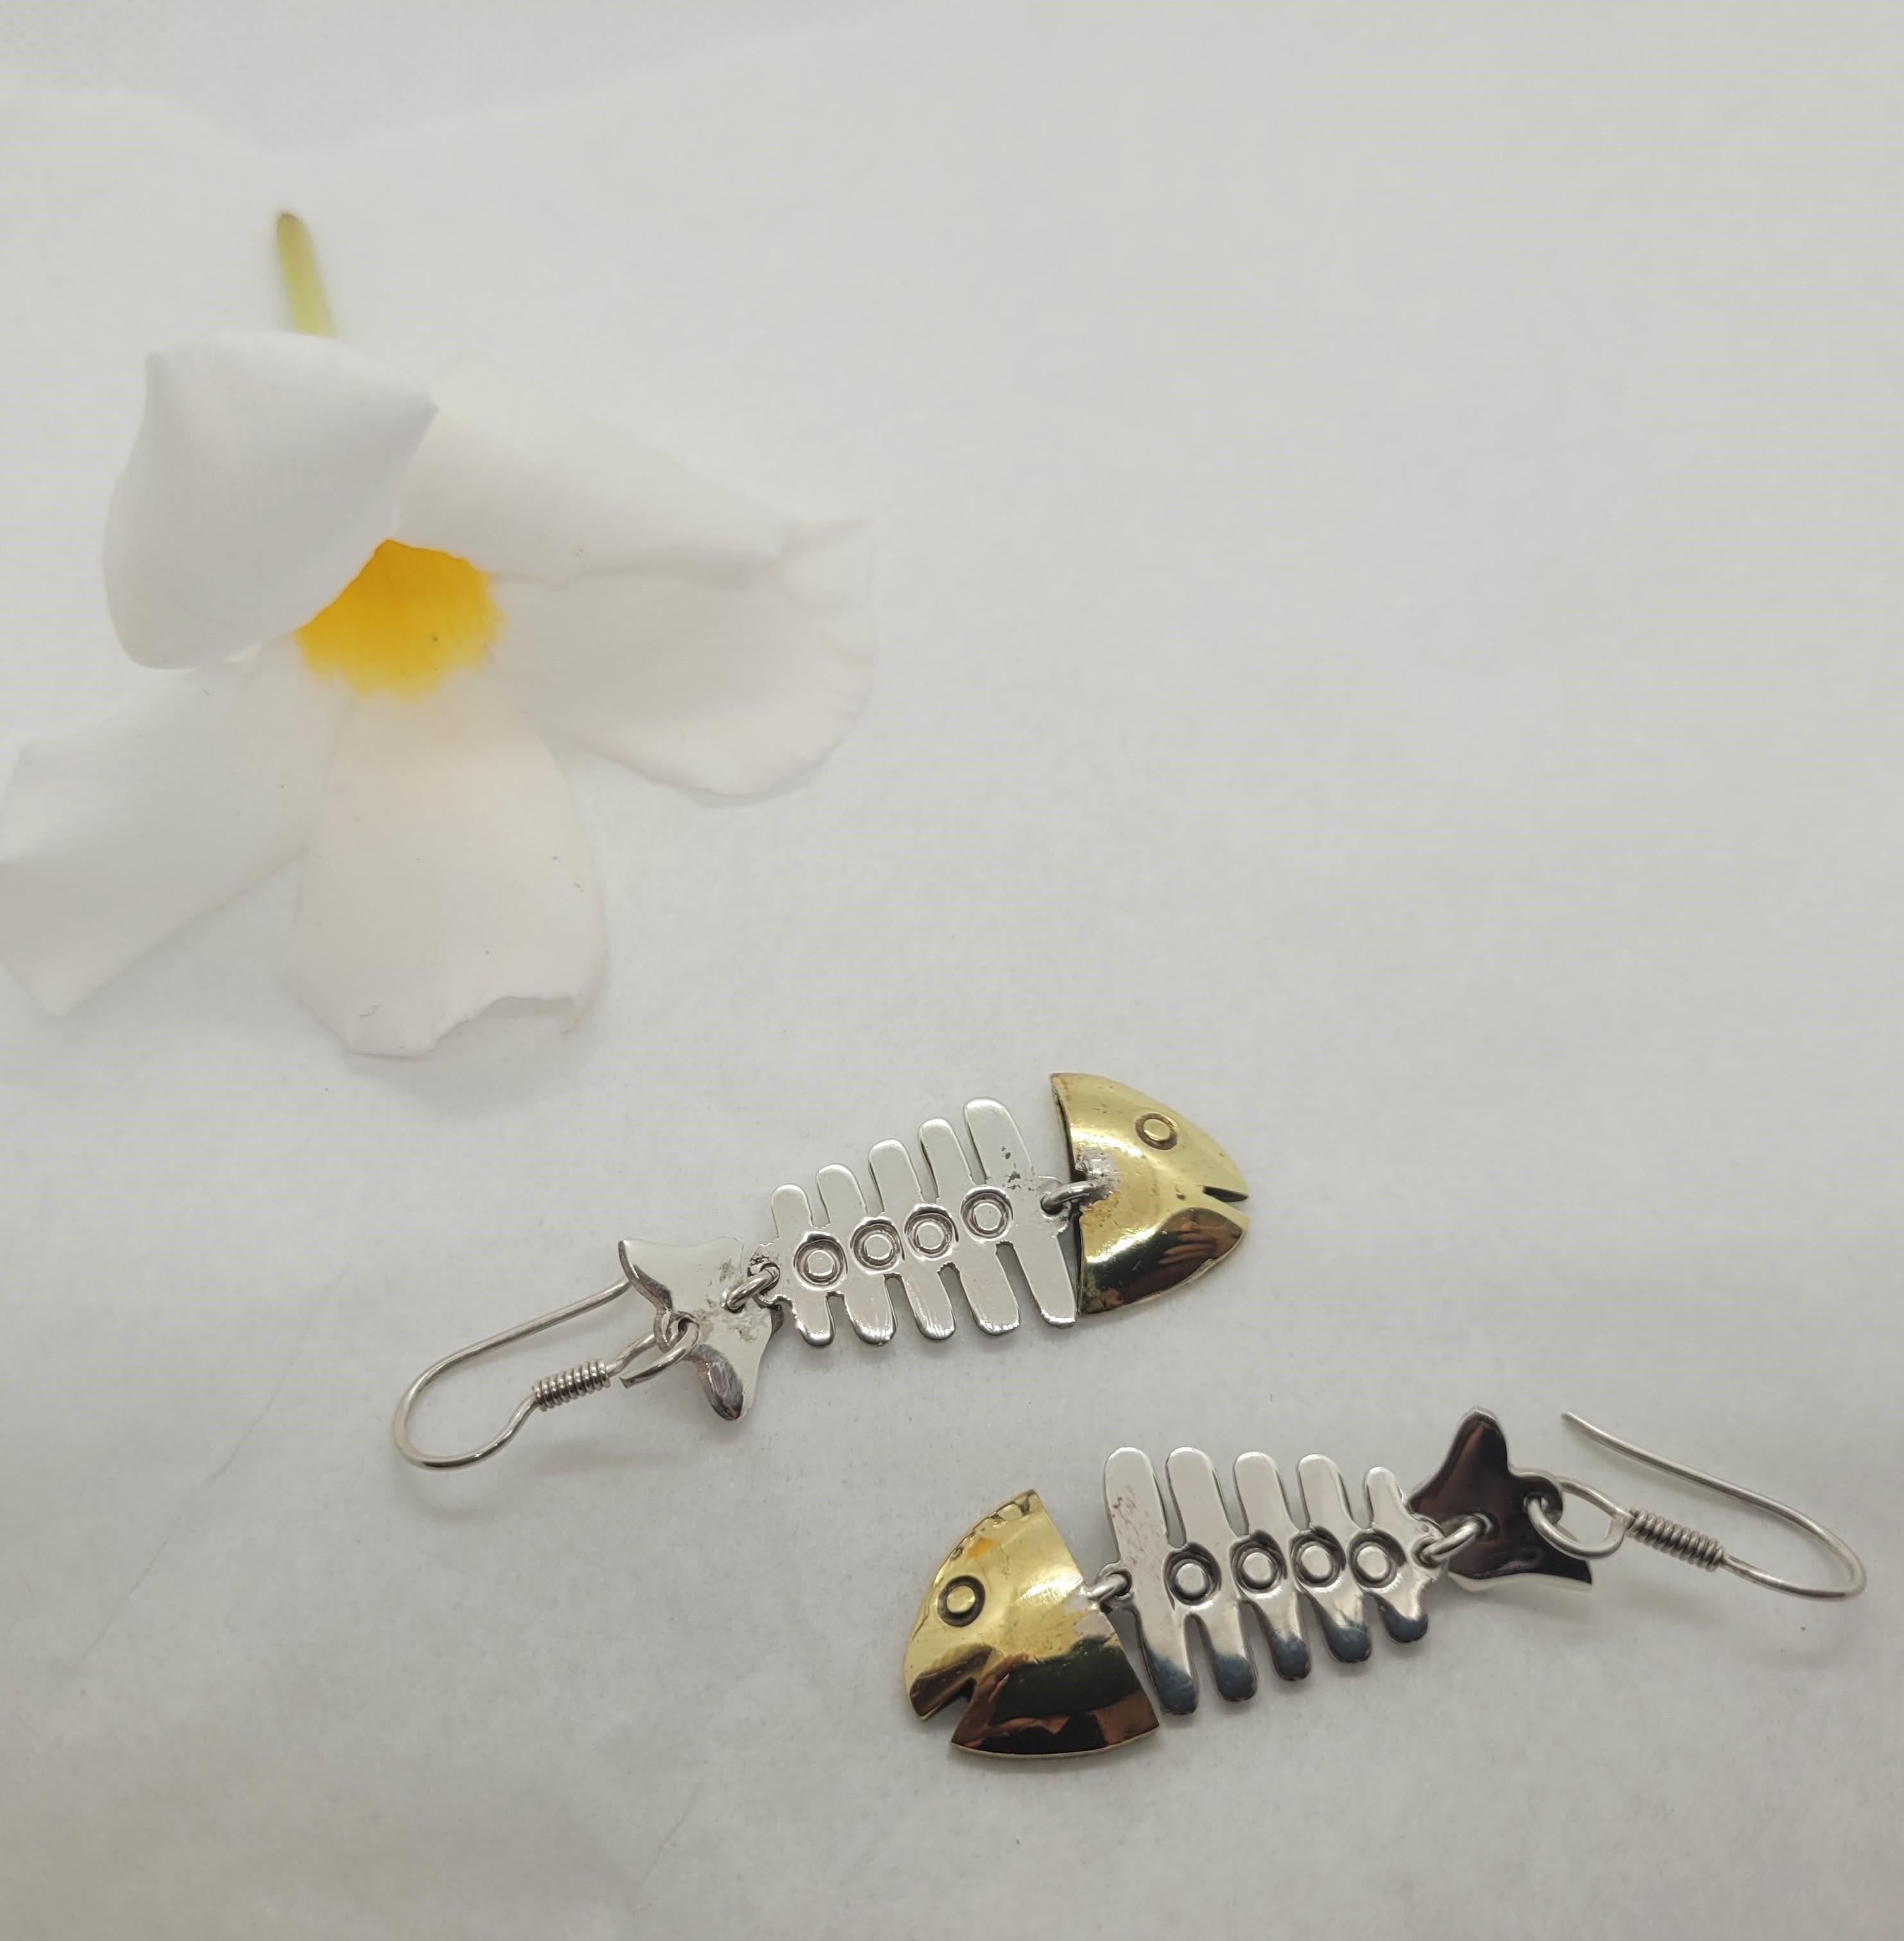 Stylish silver and gold plated fish bone earrings with a hook and weighing 11.3 grams. These fun earrings were made in Mexico, stamped Mexico 925 measuring 58 x 40 mm in size. Overall, these earrings are in very good condition and make a fun